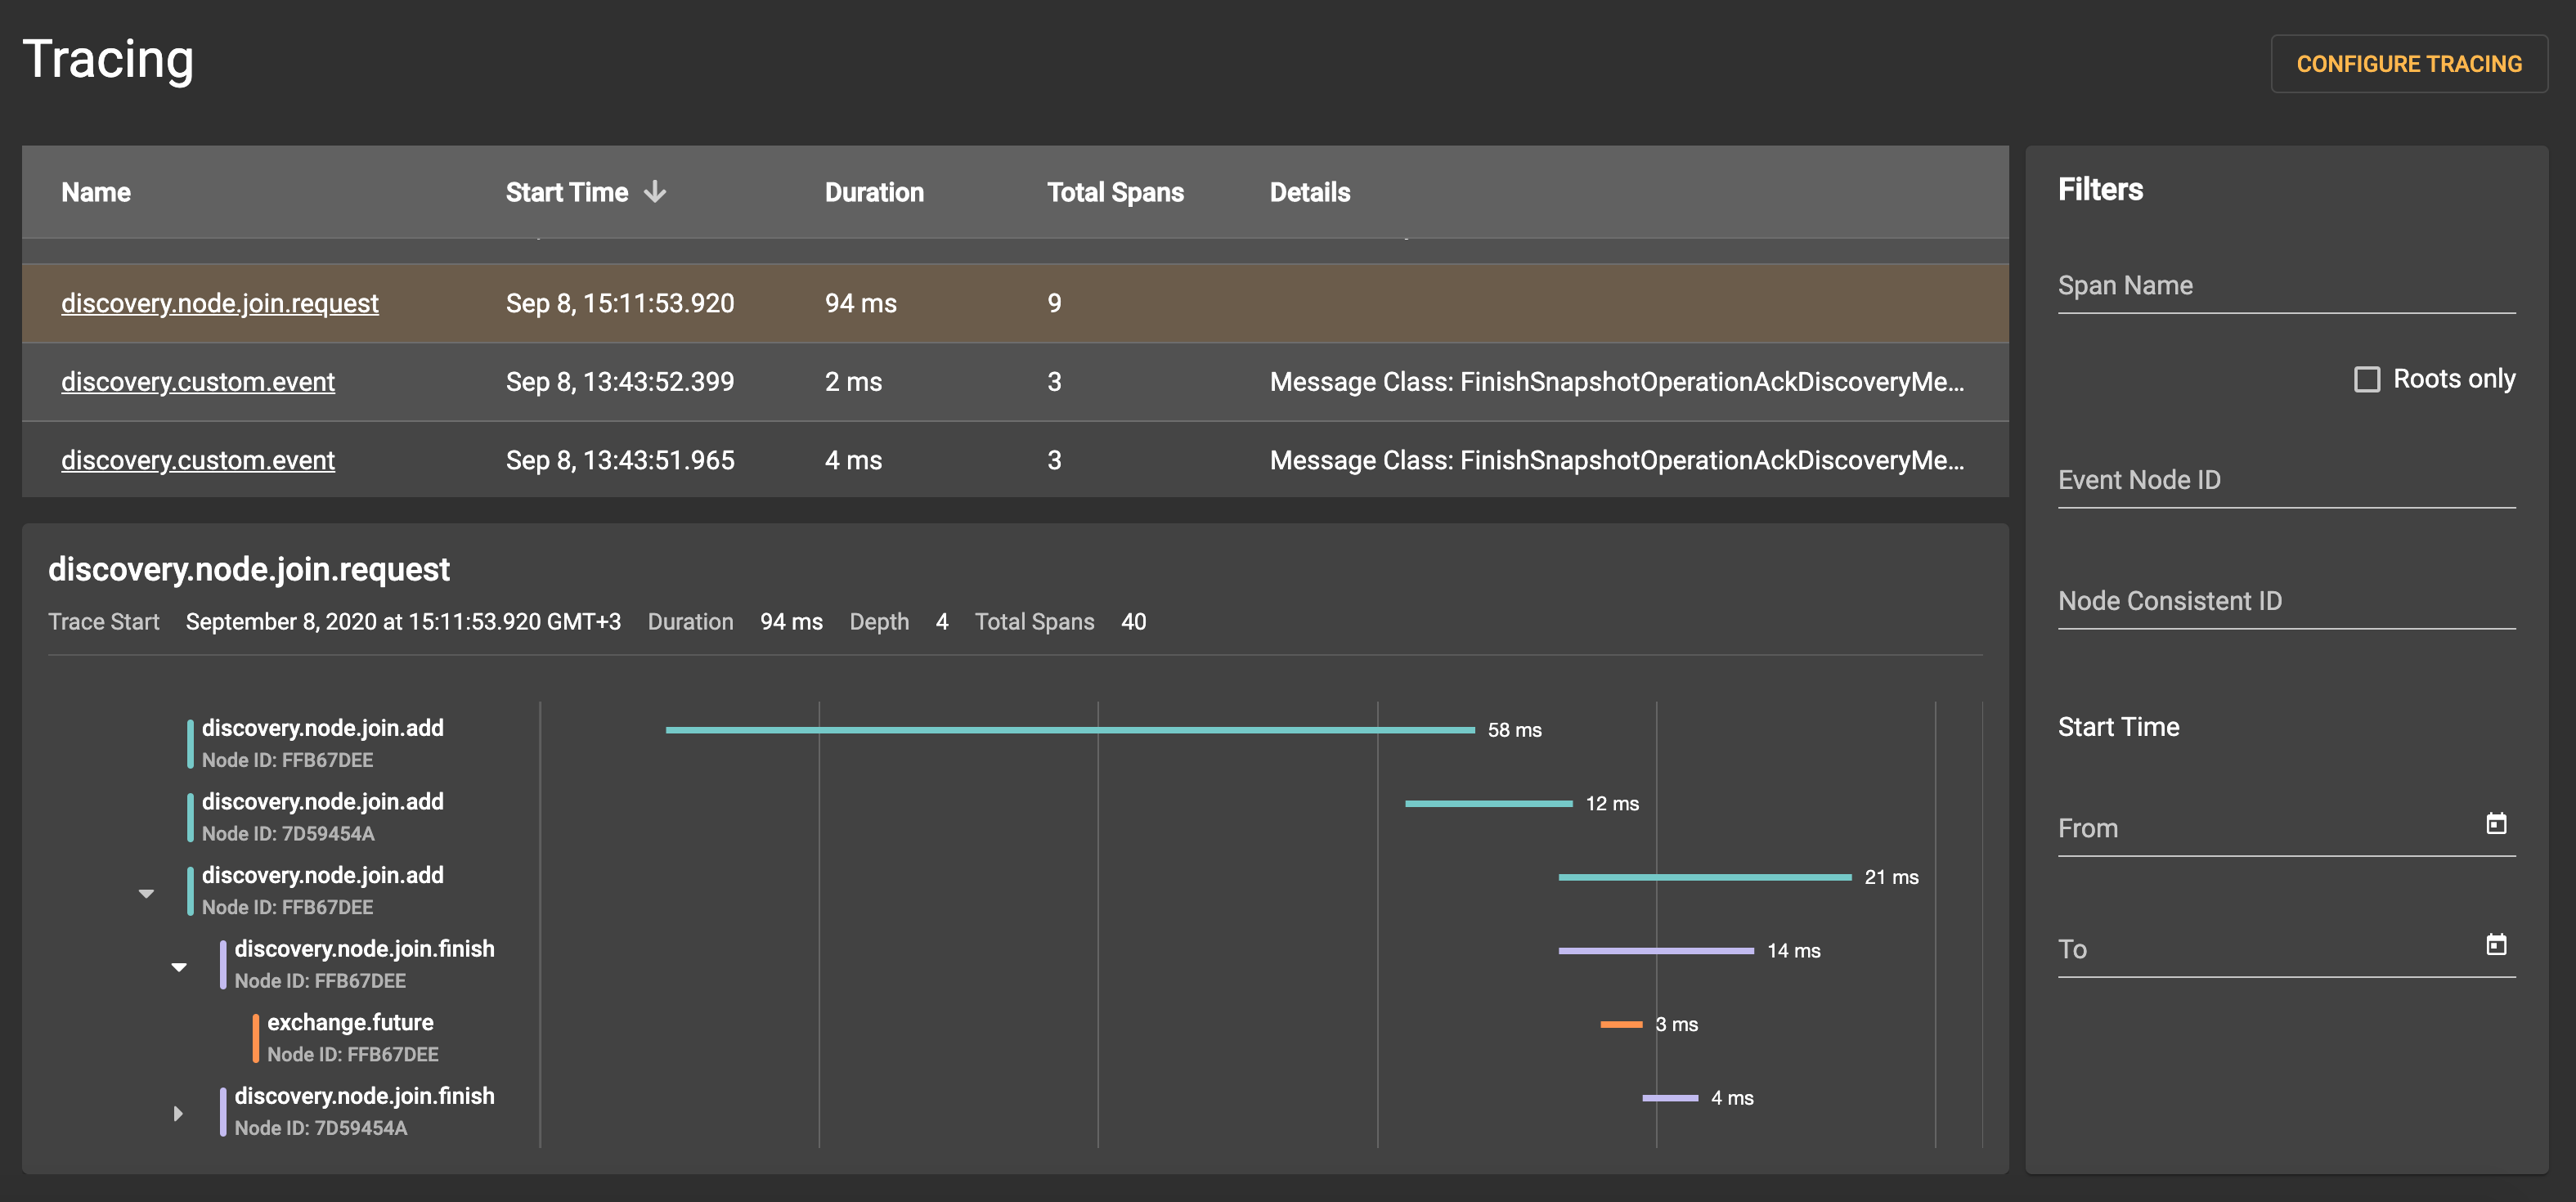 Apache Ignite Monitoring With Control Center - Tracing